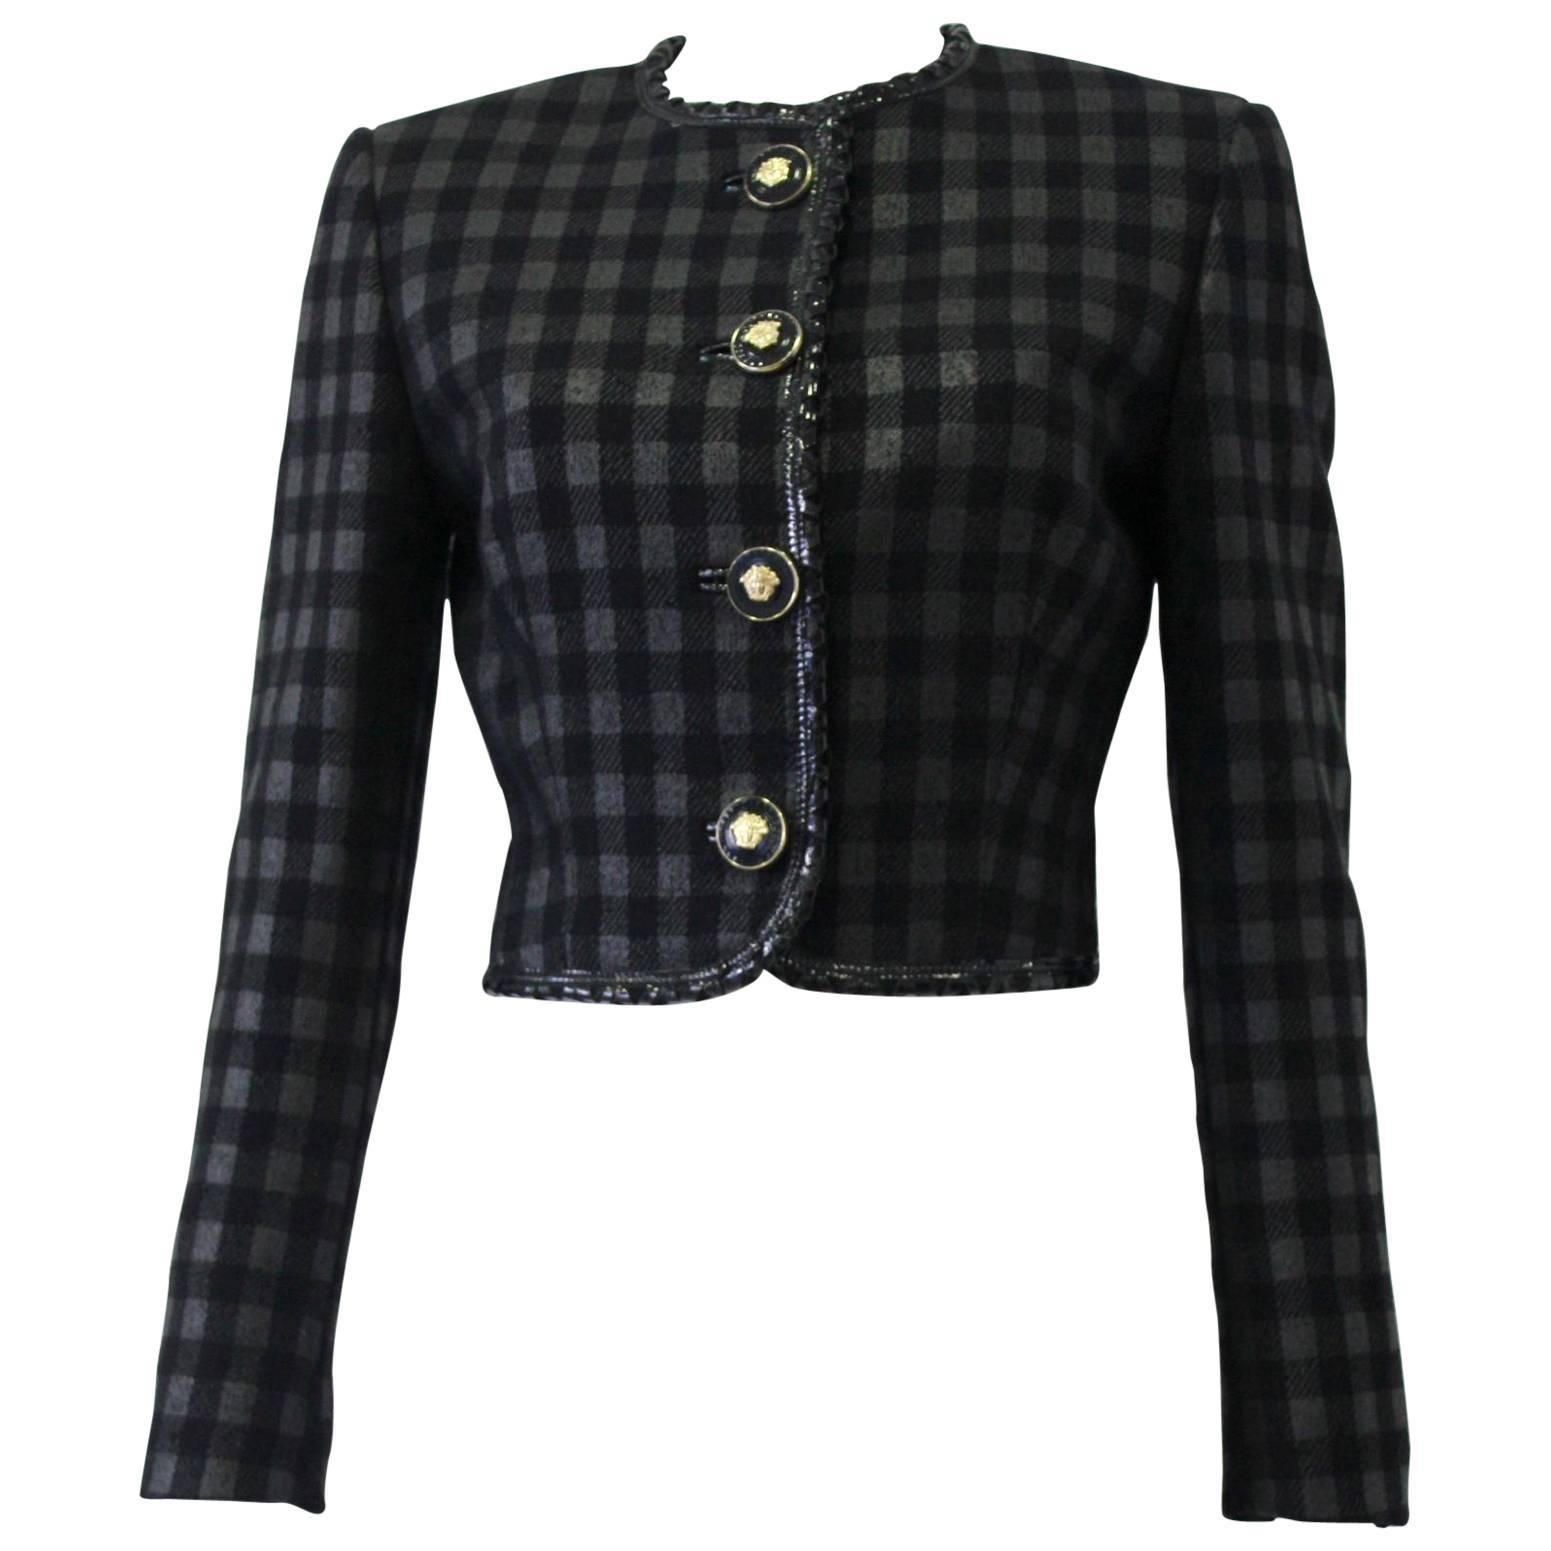 Rare Gianni Versace Couture Metallic Checked Jacket With Patent Leather 1995 For Sale